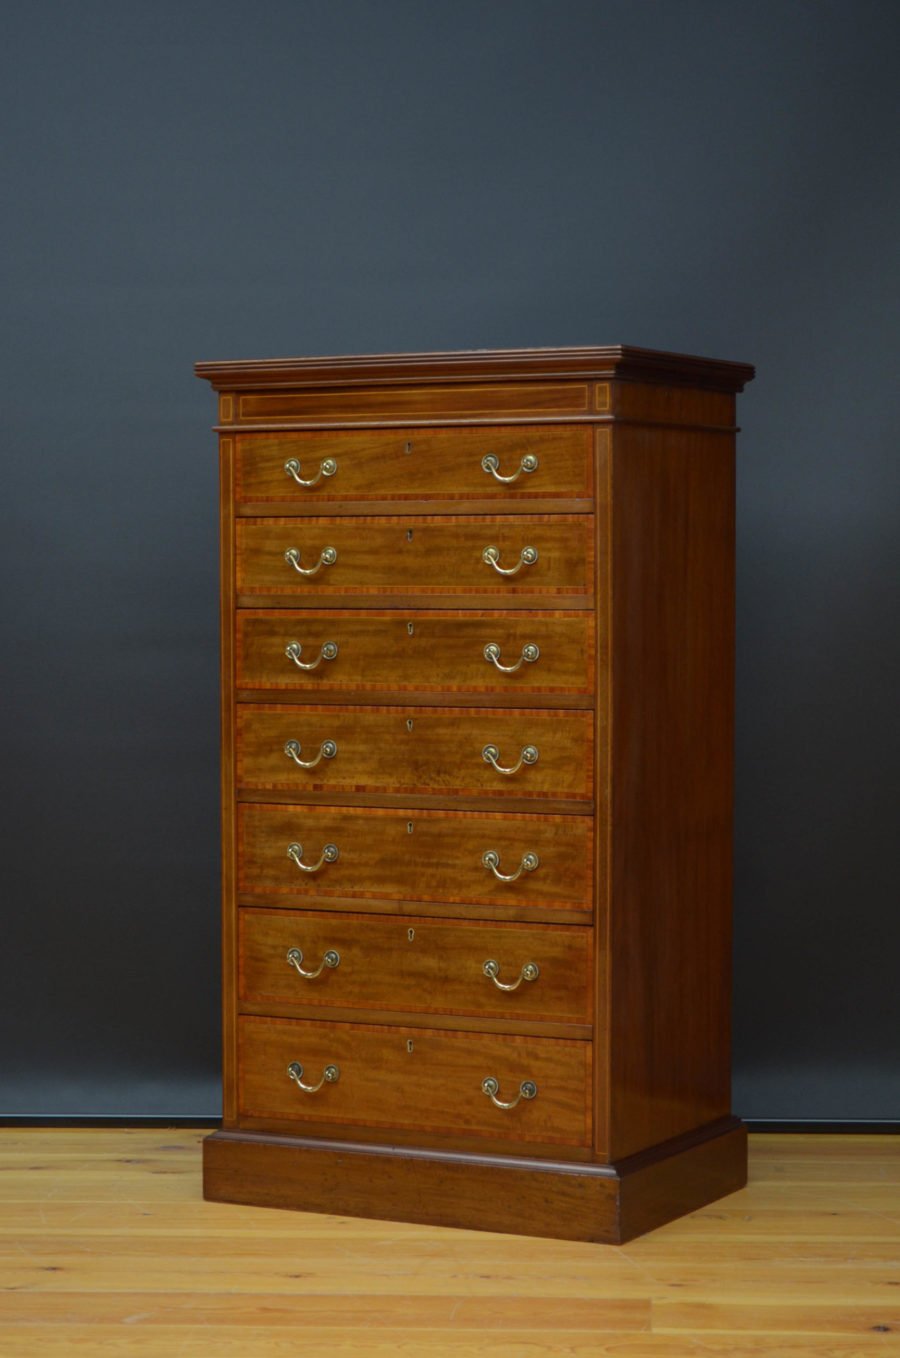 Maple & Co chest